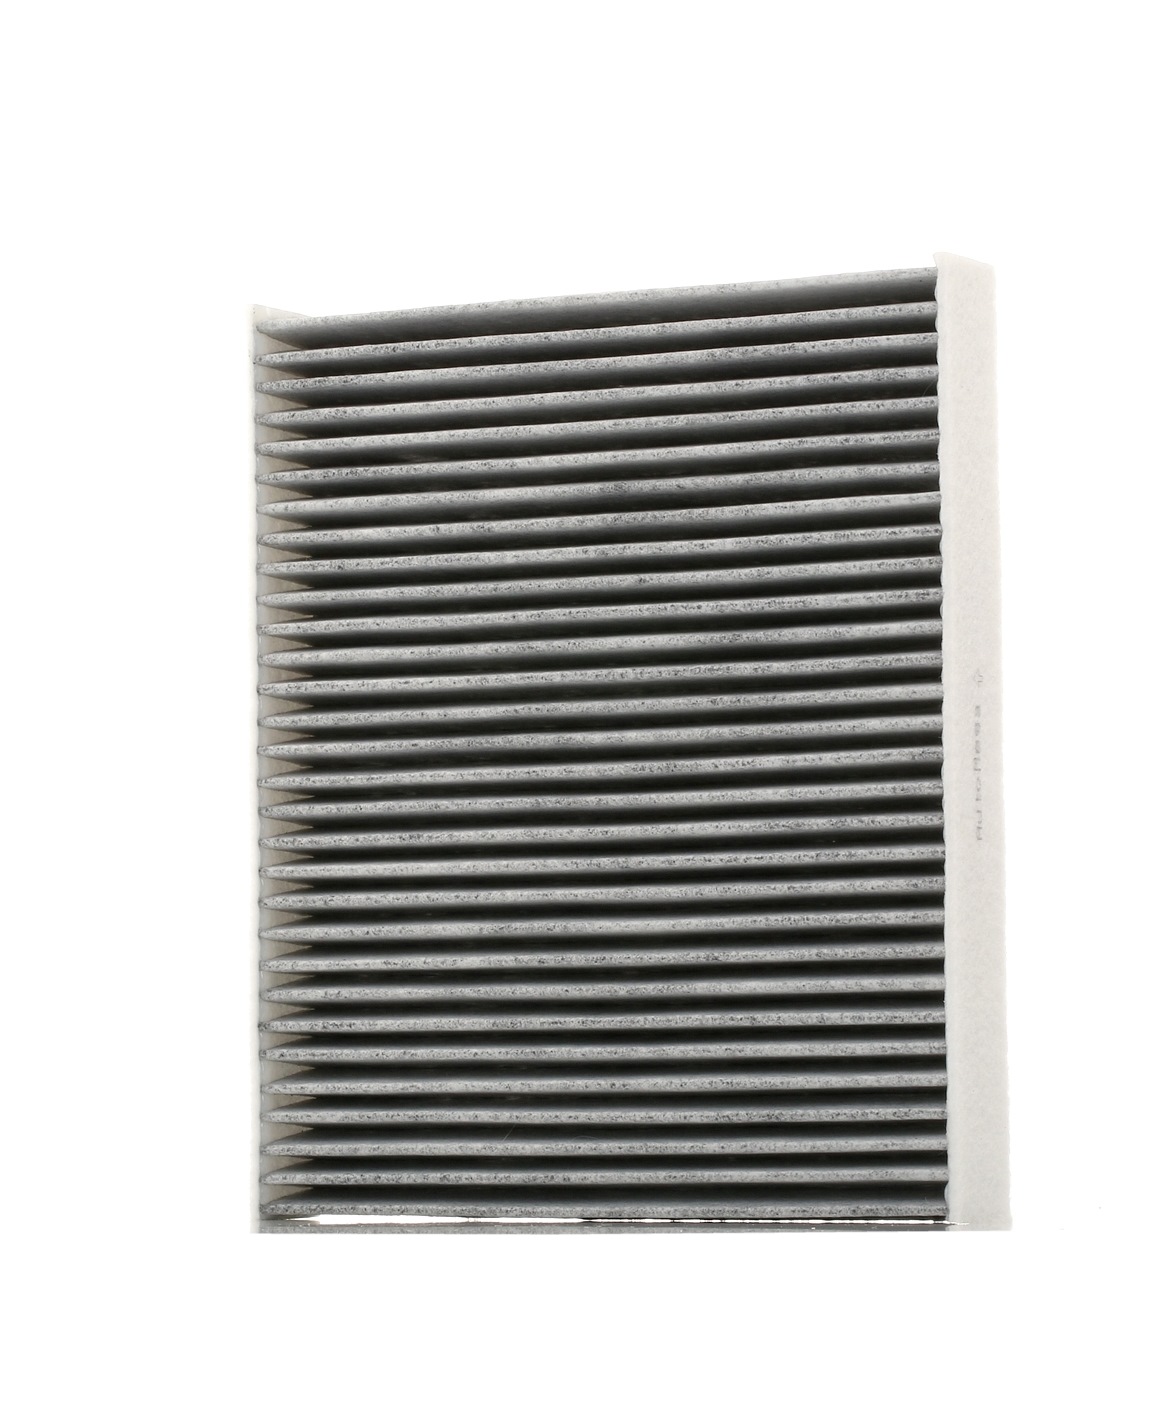 AUTOMEGA Activated Carbon Filter, 240 mm x 204 mm x 30 mm Width: 204mm, Height: 30mm, Length: 240mm Cabin filter 180006210 buy